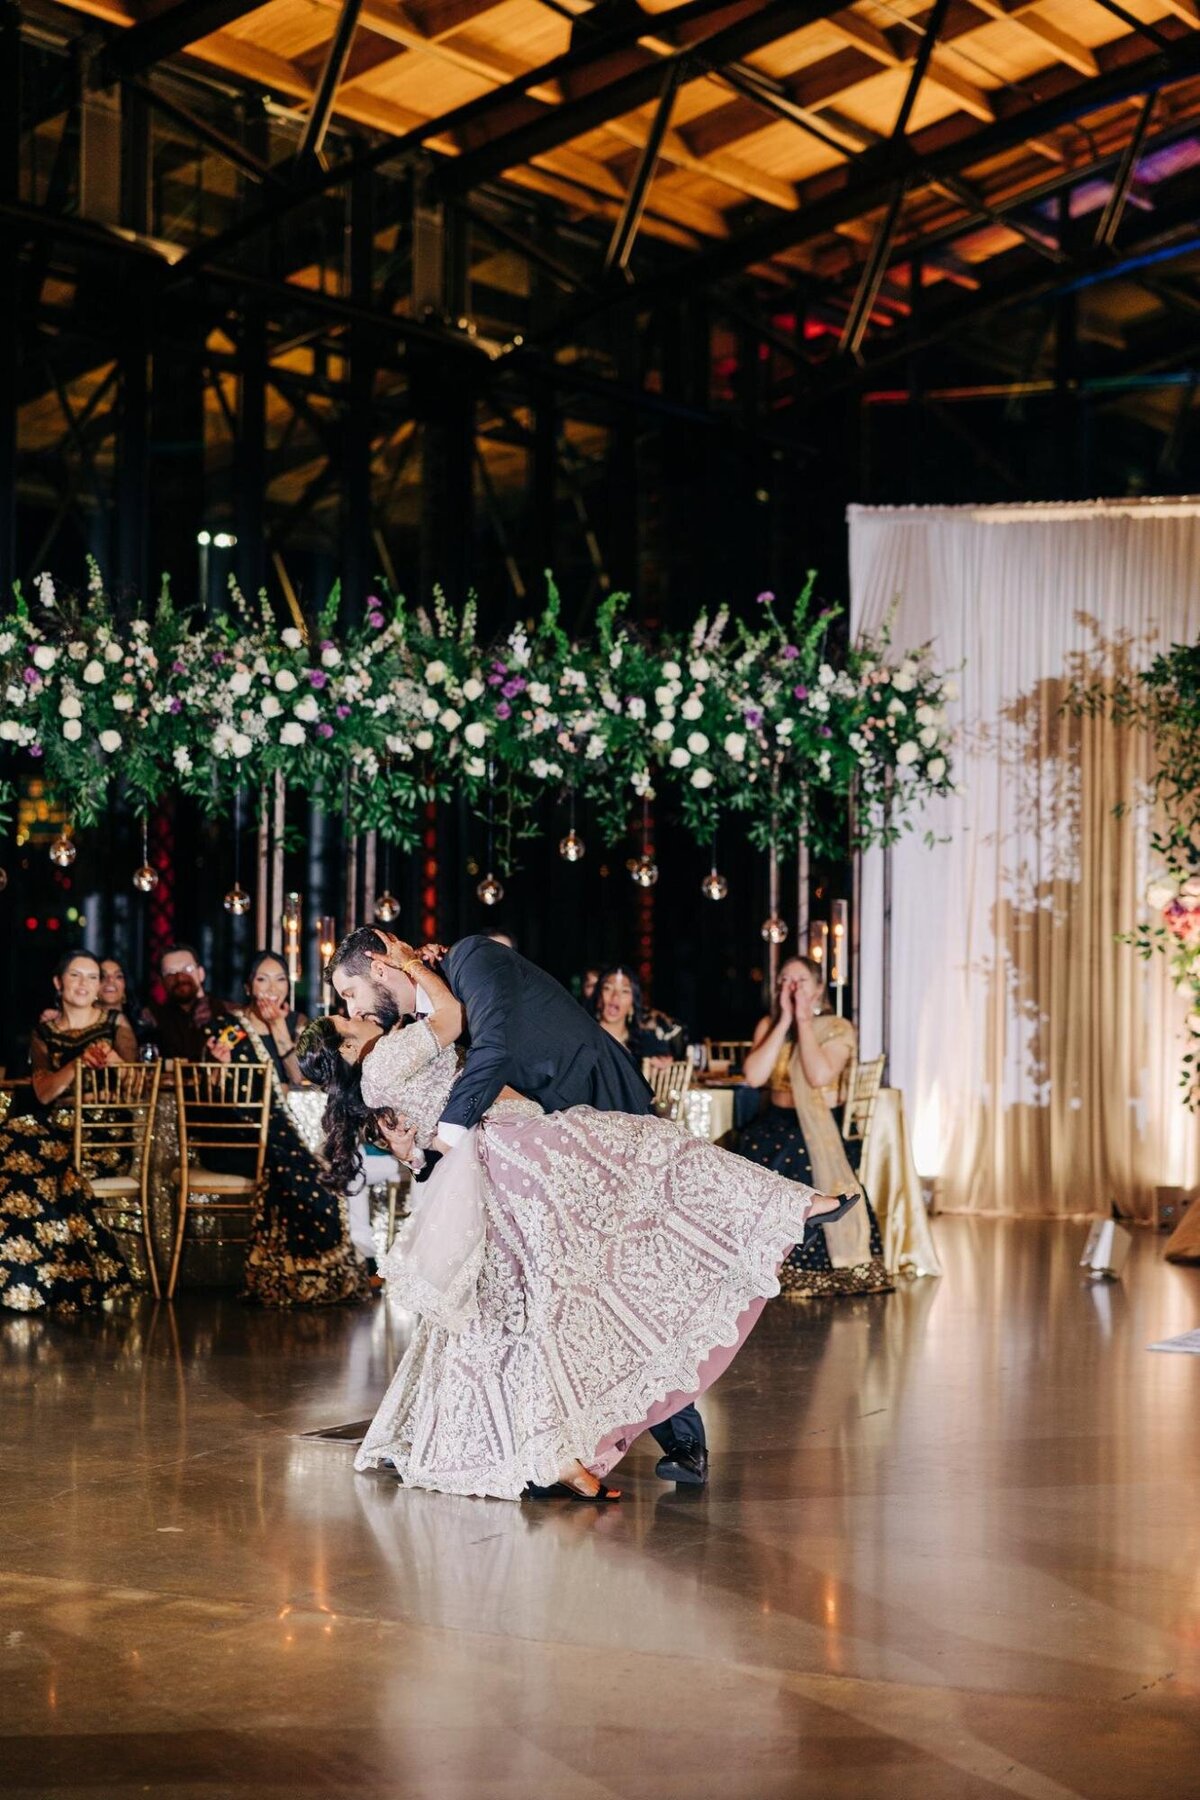 A groom dips the bride during their first dance at a wedding reception, surrounded by floral decorations and guests.